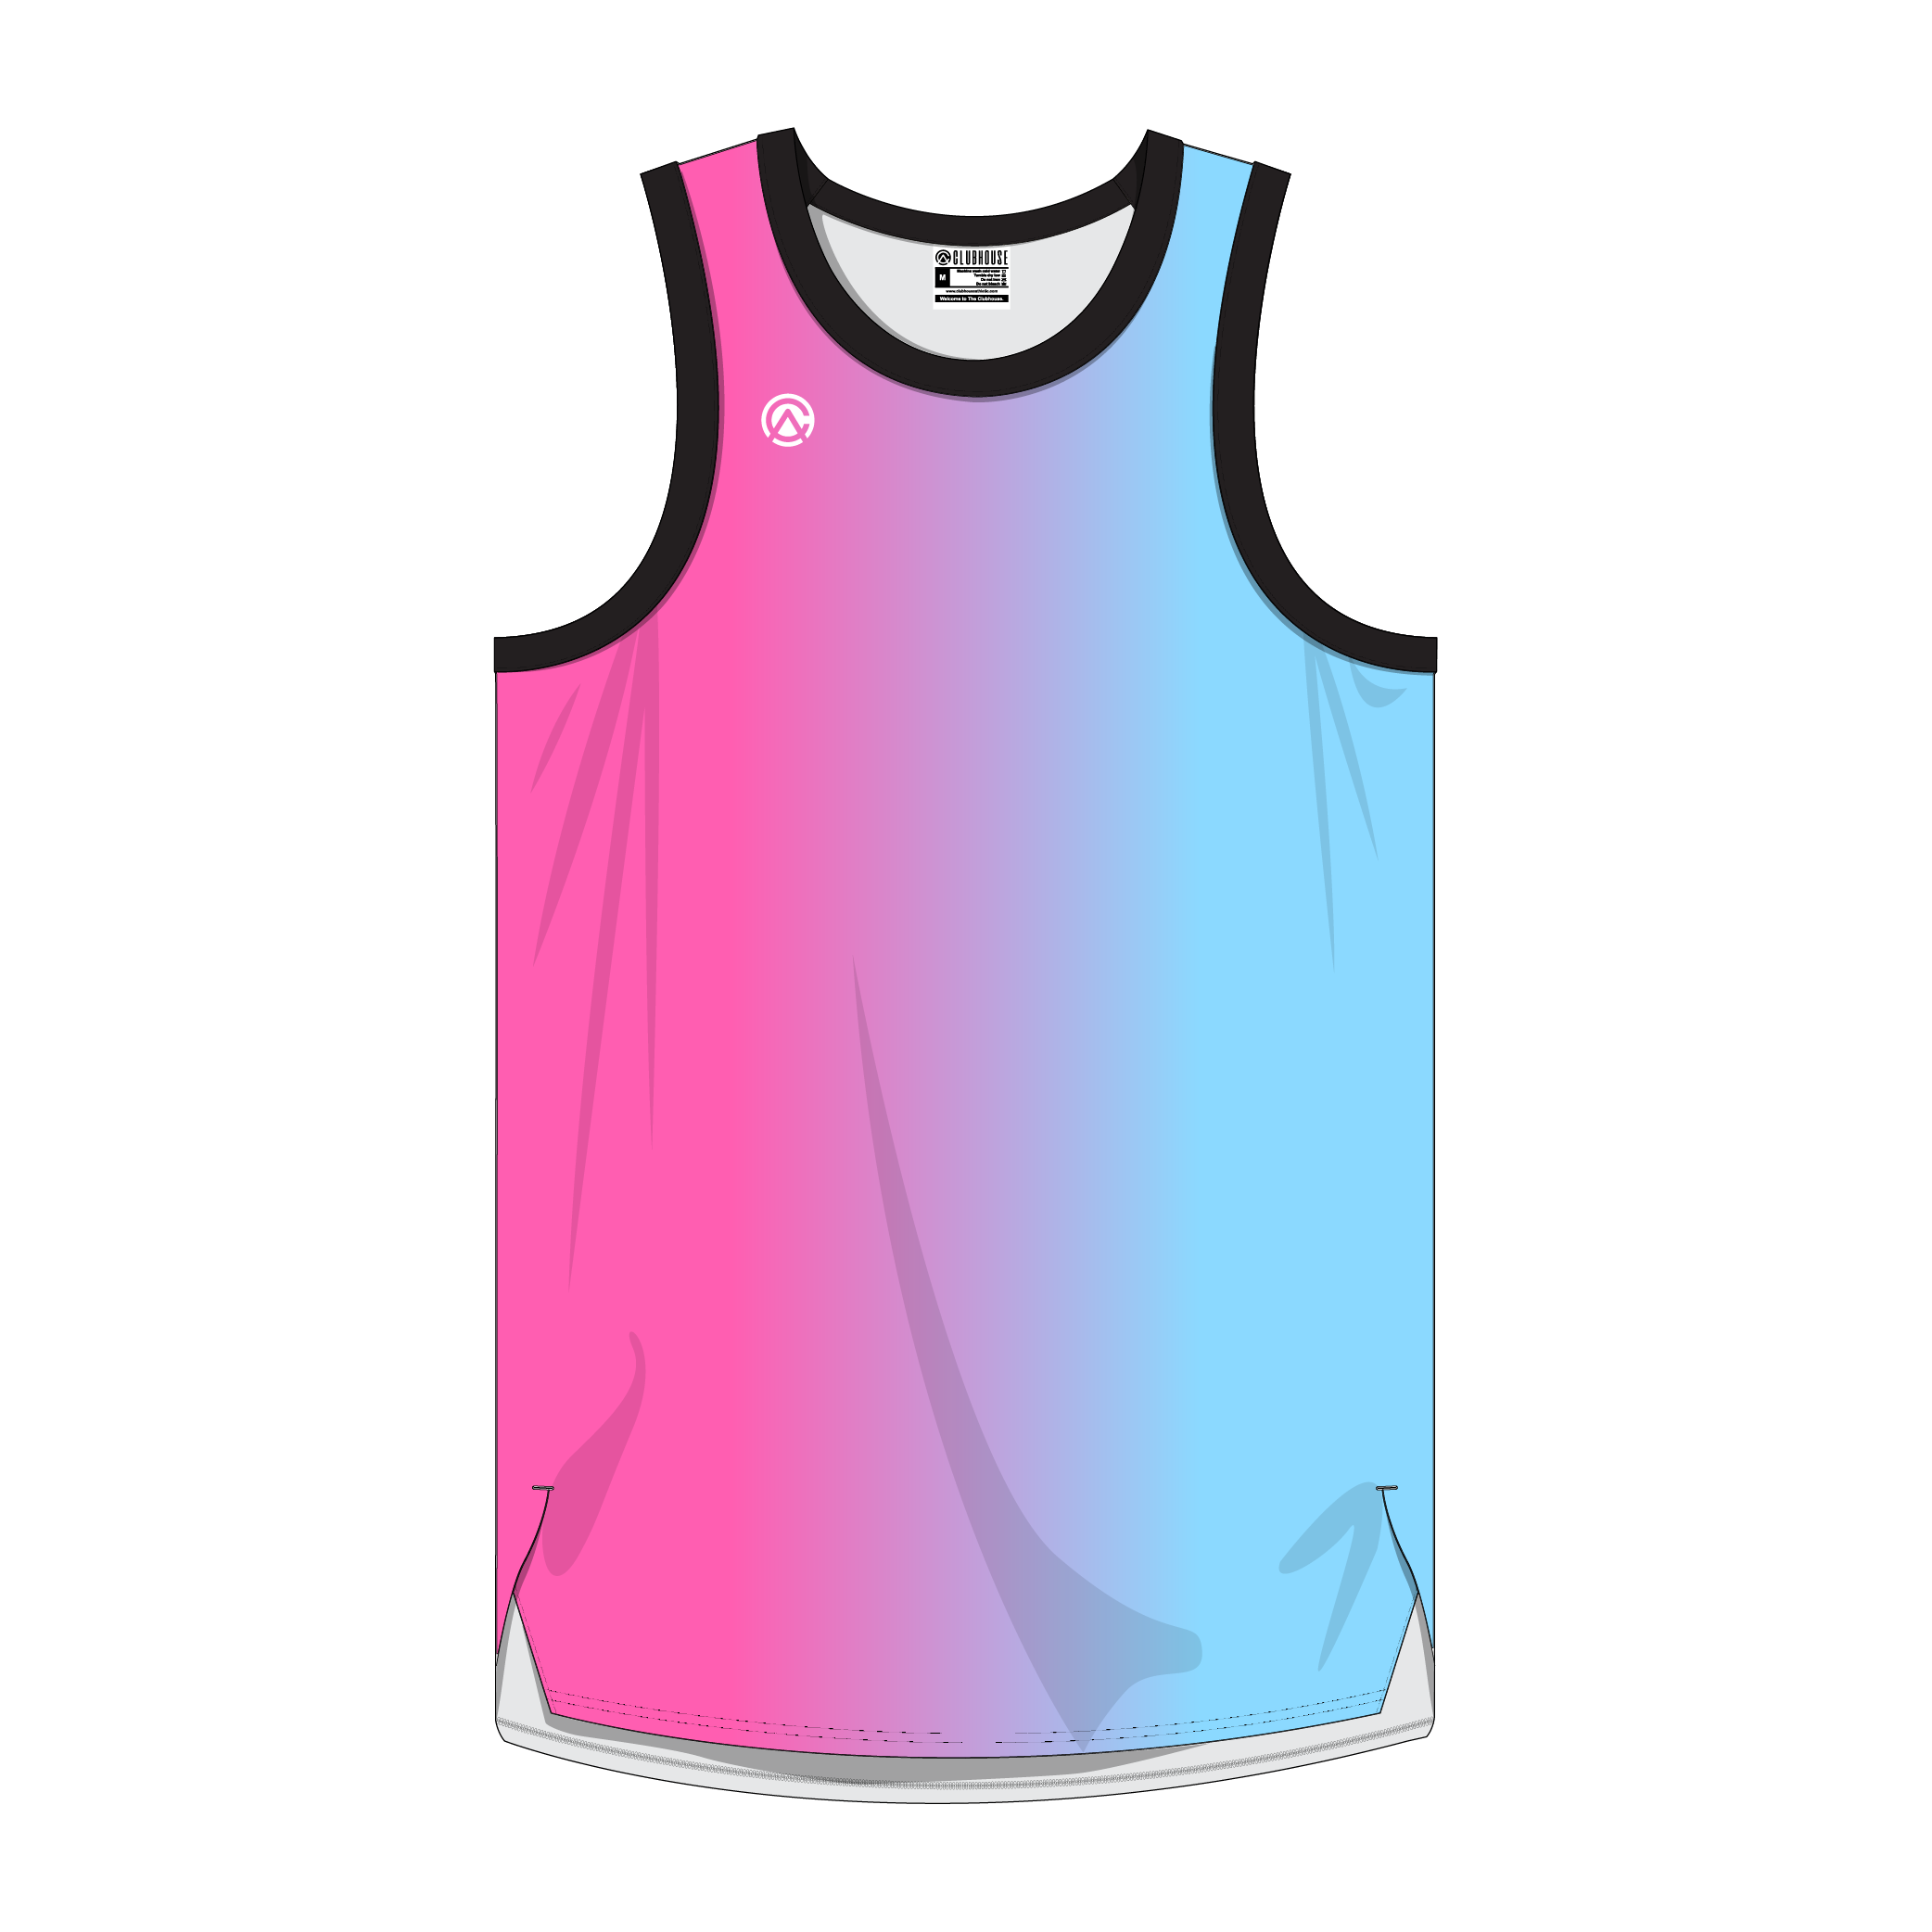 Clubhouse Original: The Miami Vice Basketball Jersey